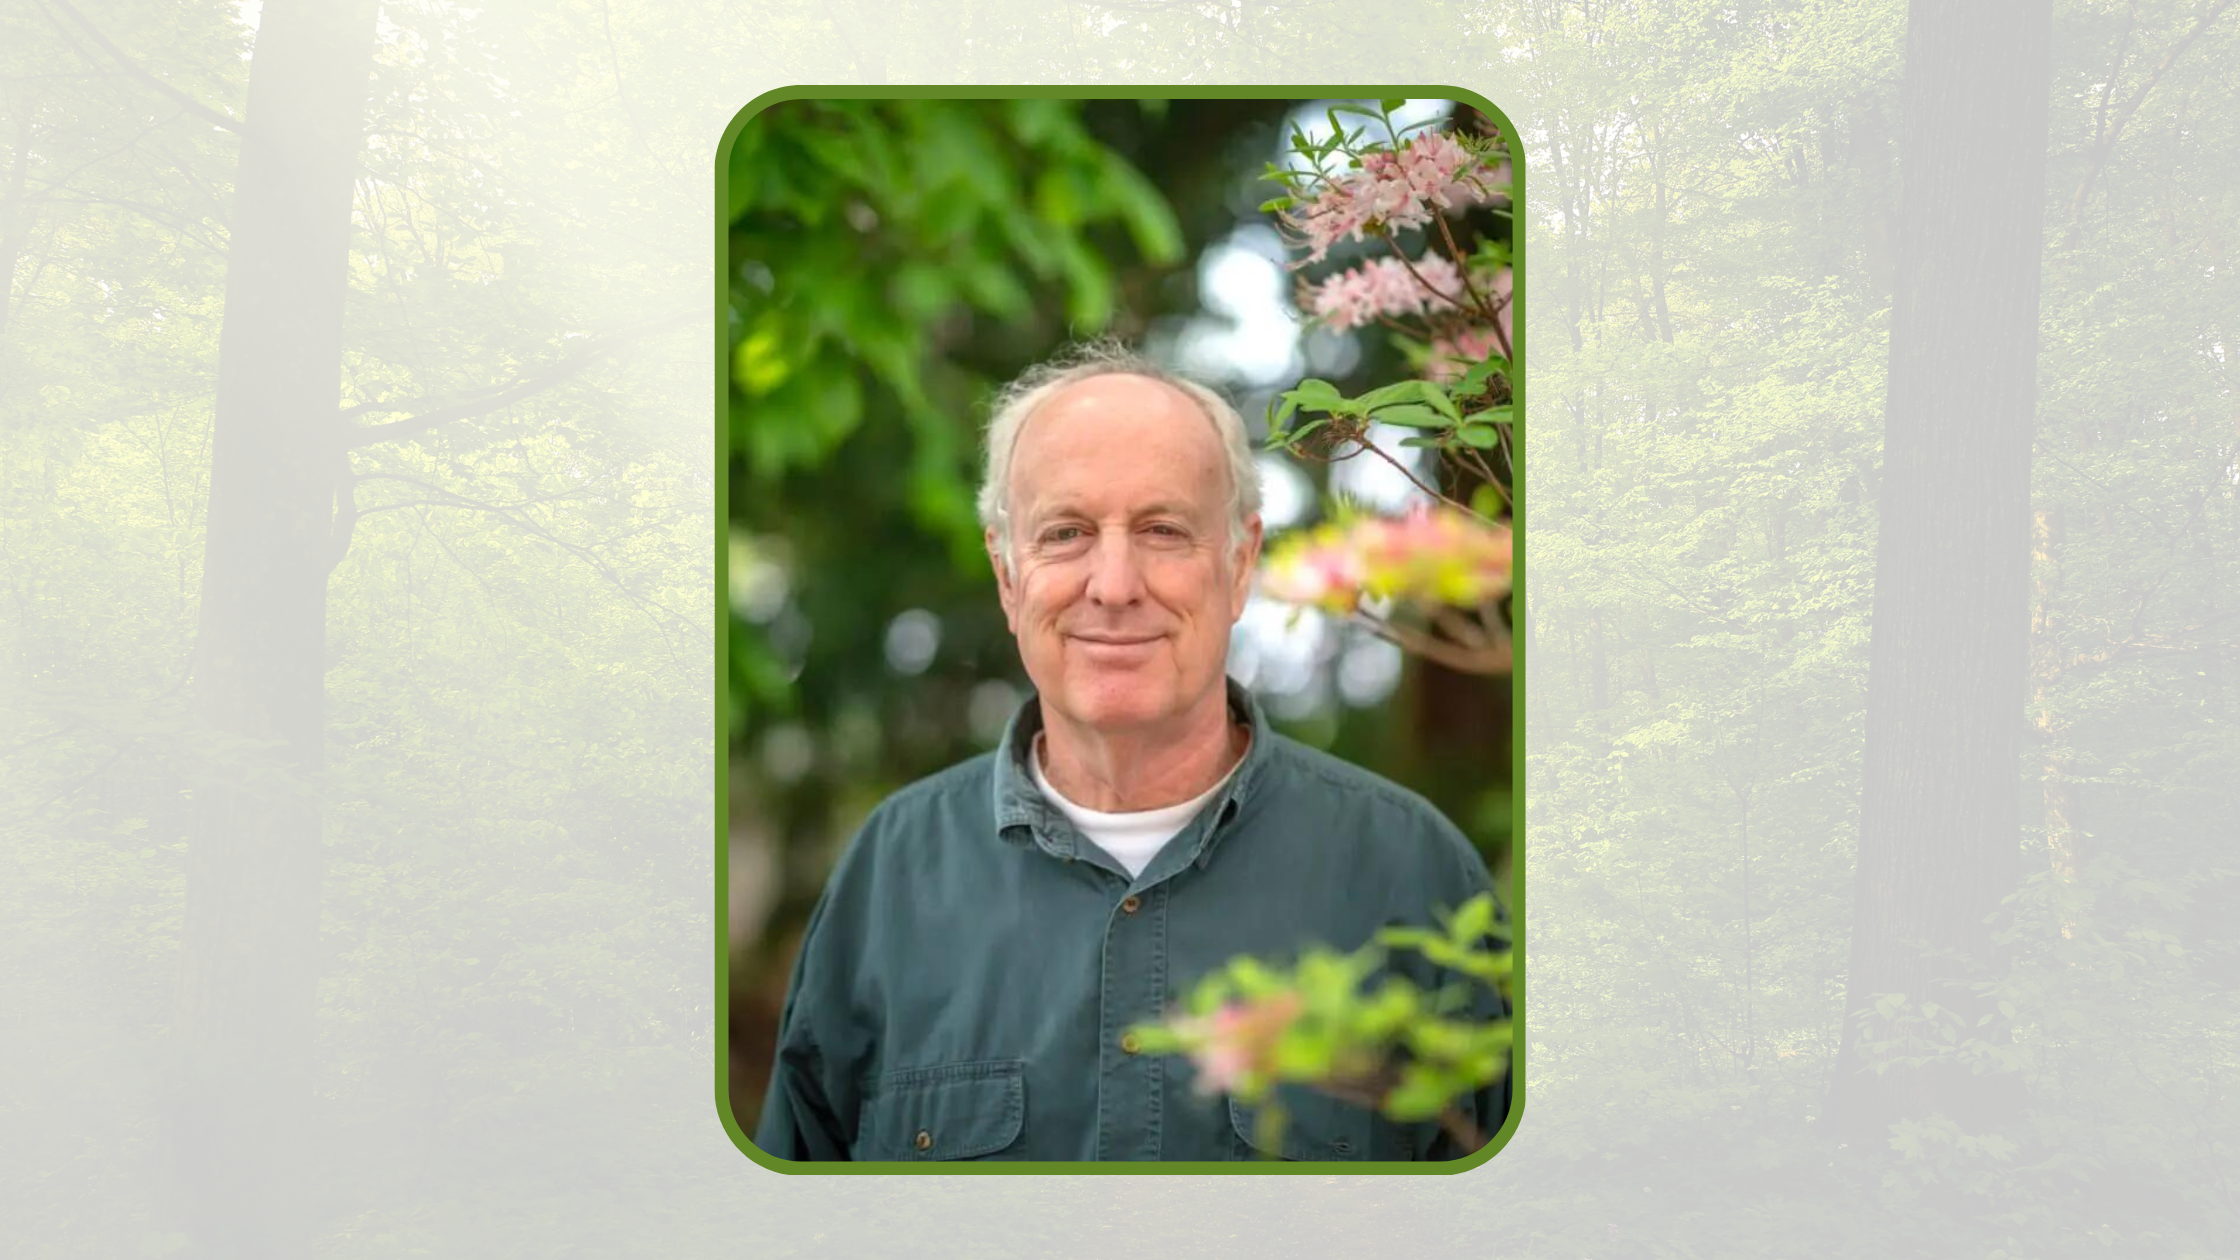 Doug Tallamy, Ph.D., professor of Entomology at University of Delaware and author of Nature’s Best Hope and the Nature of Oaks